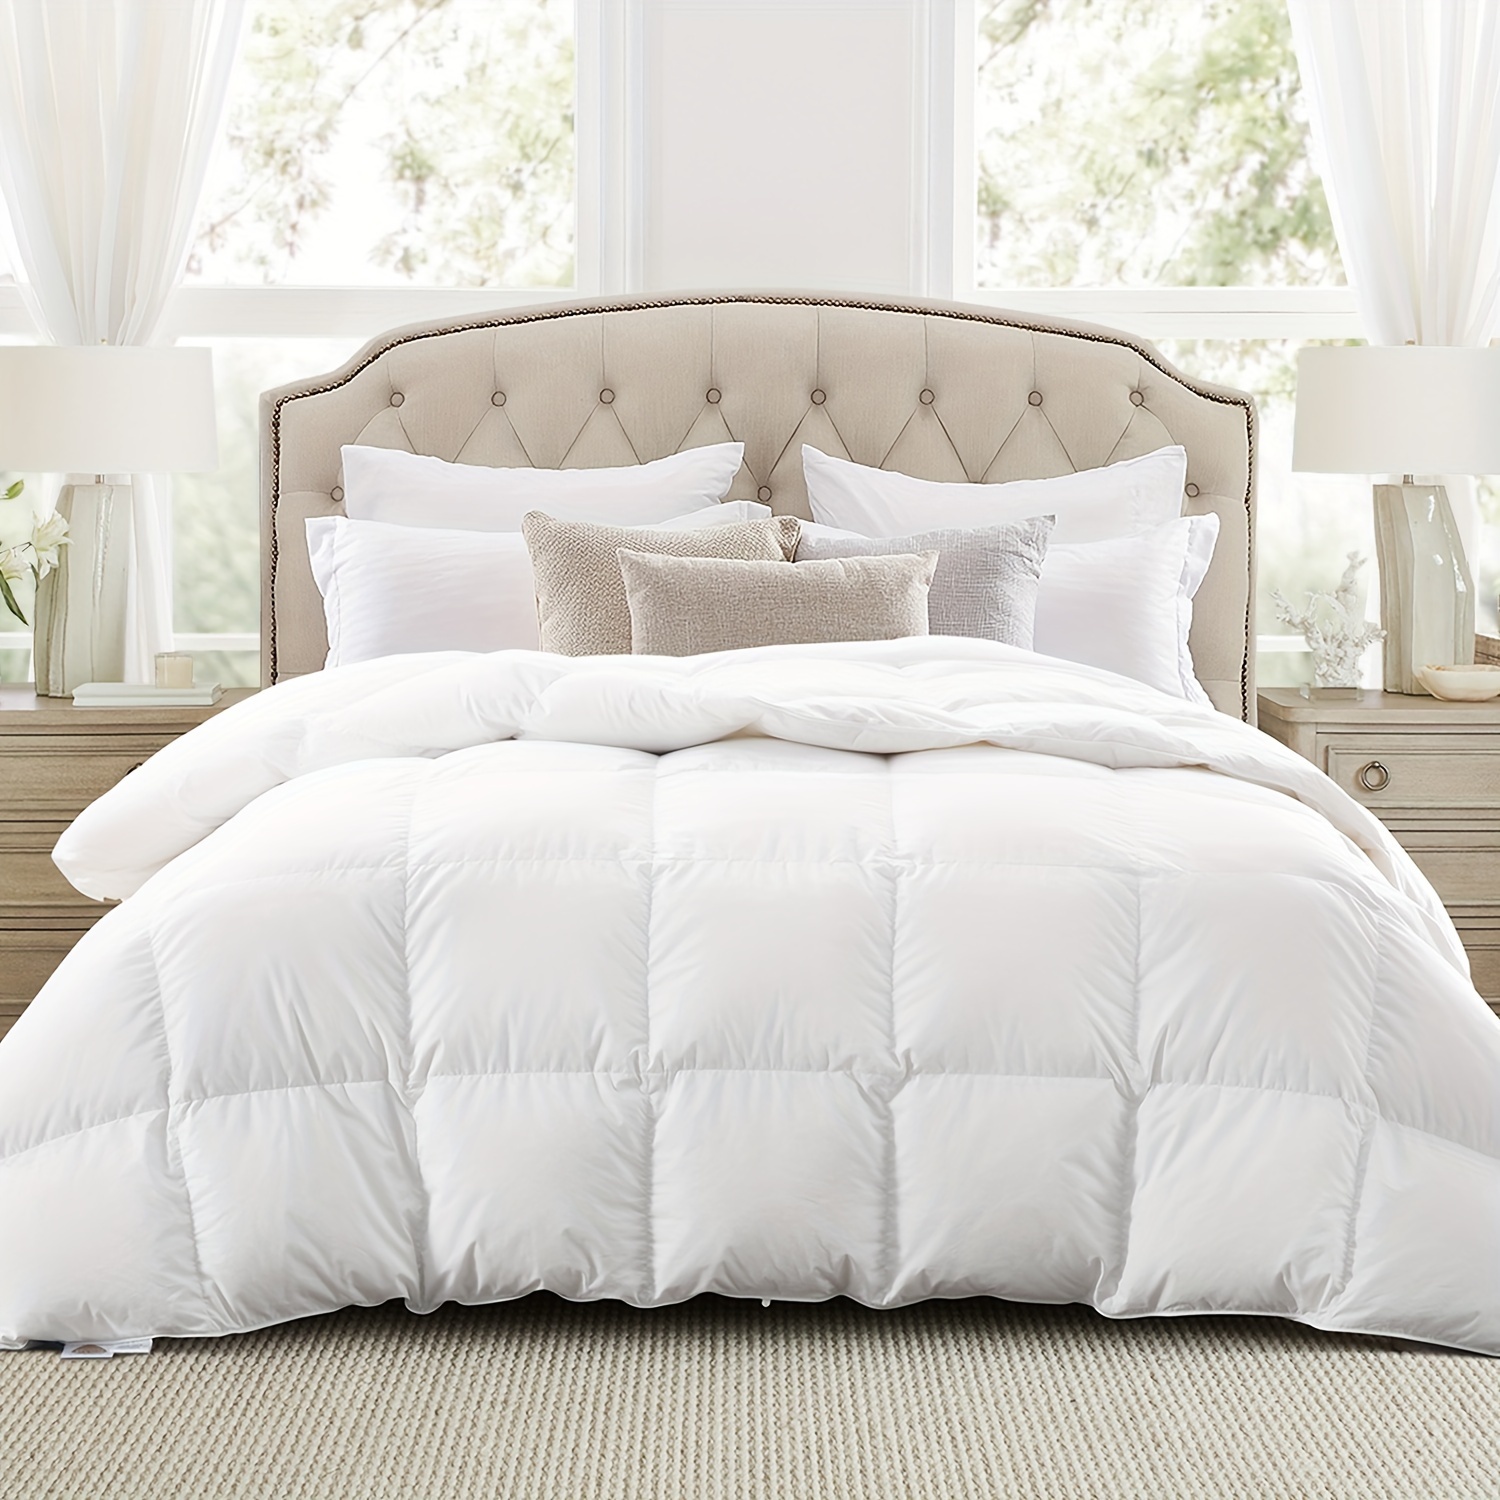 

Luxurious Feather Down Comforter King Size, Fluffy Hotel Collection Duvet Insert Medium Warmth For All Season, 100% Soft Cotton Shell With Corner Tabs, White